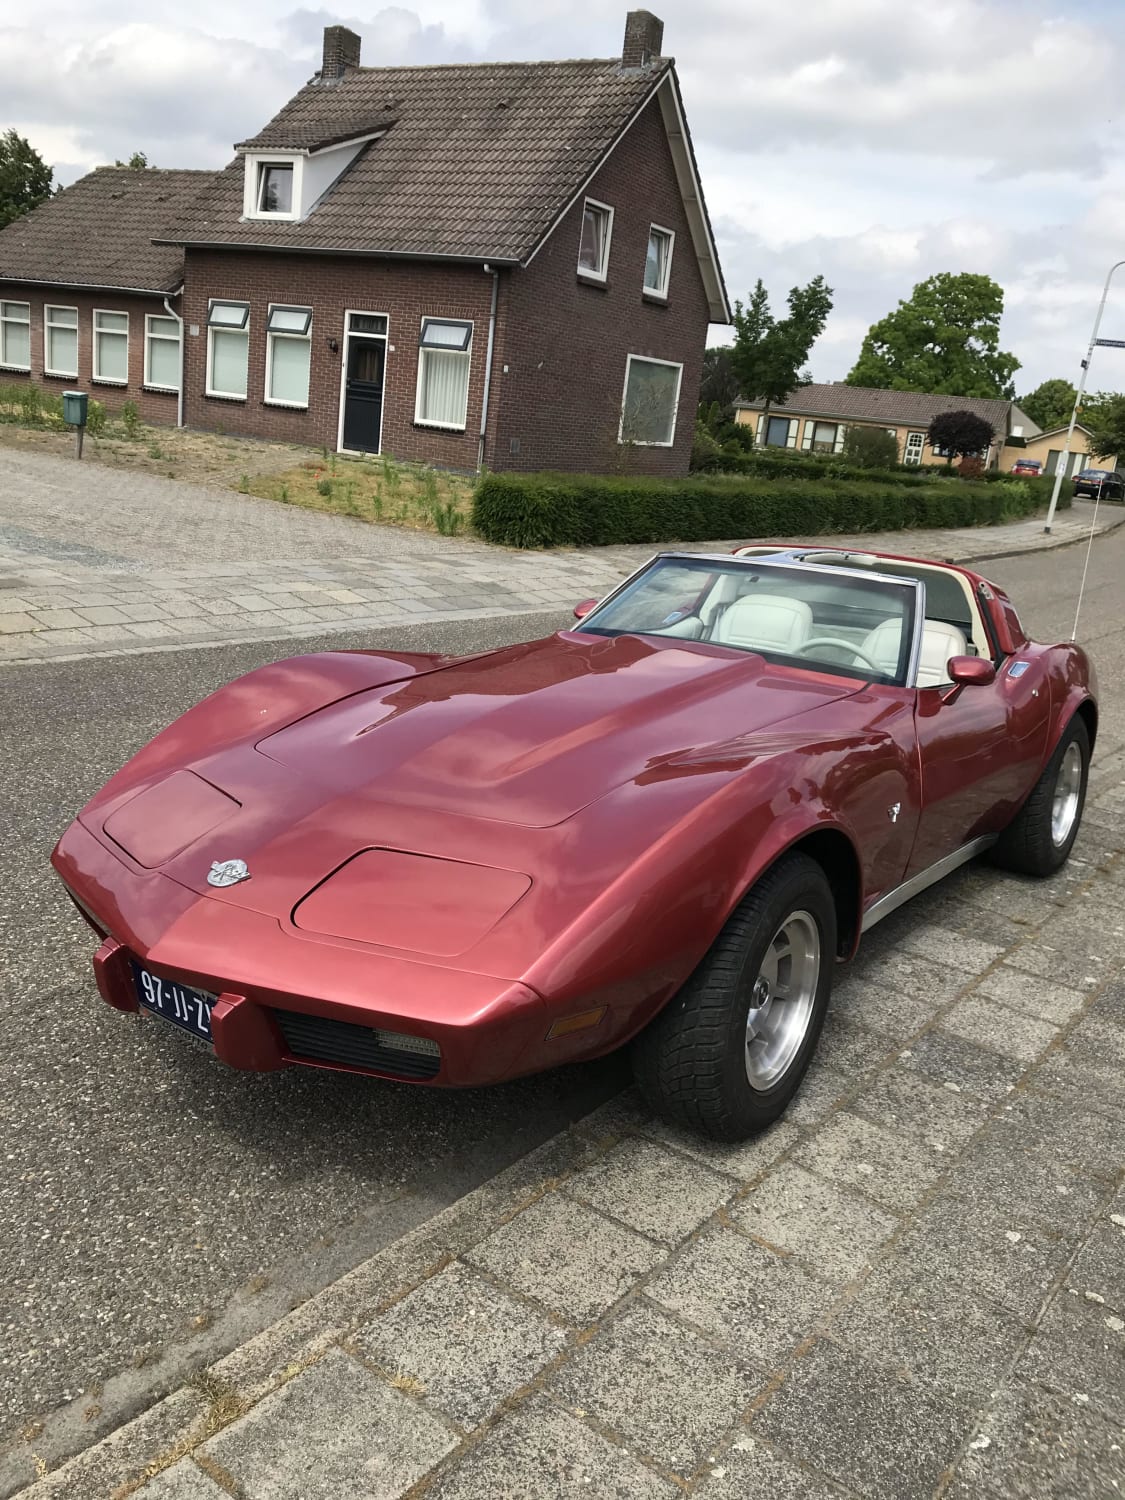 Nice little Corvette spotted today in my little Dutch hometown